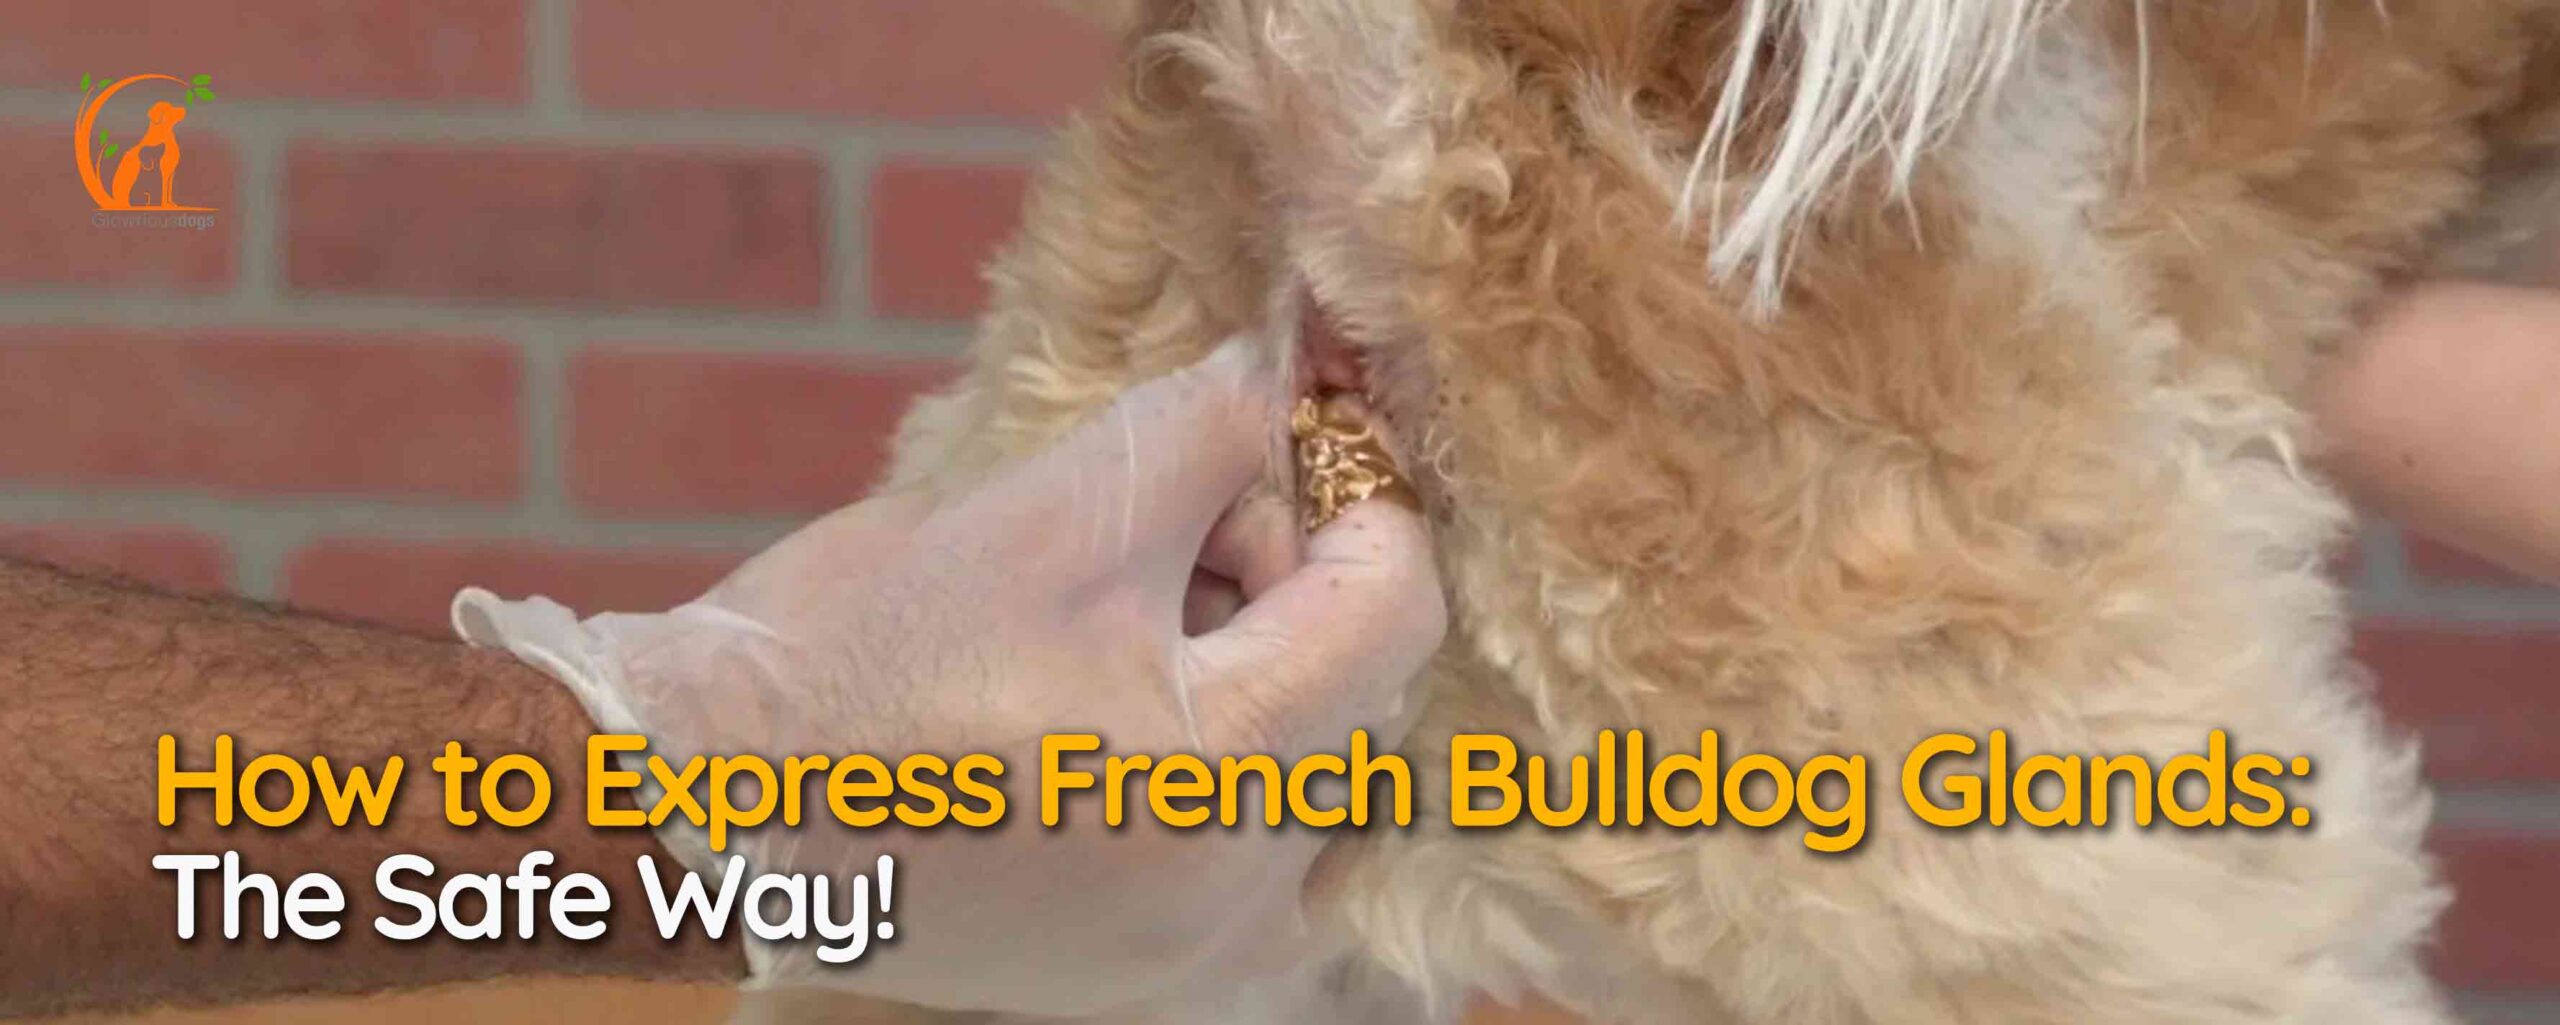 How to Express French Bulldog Glands: The Safe Way!